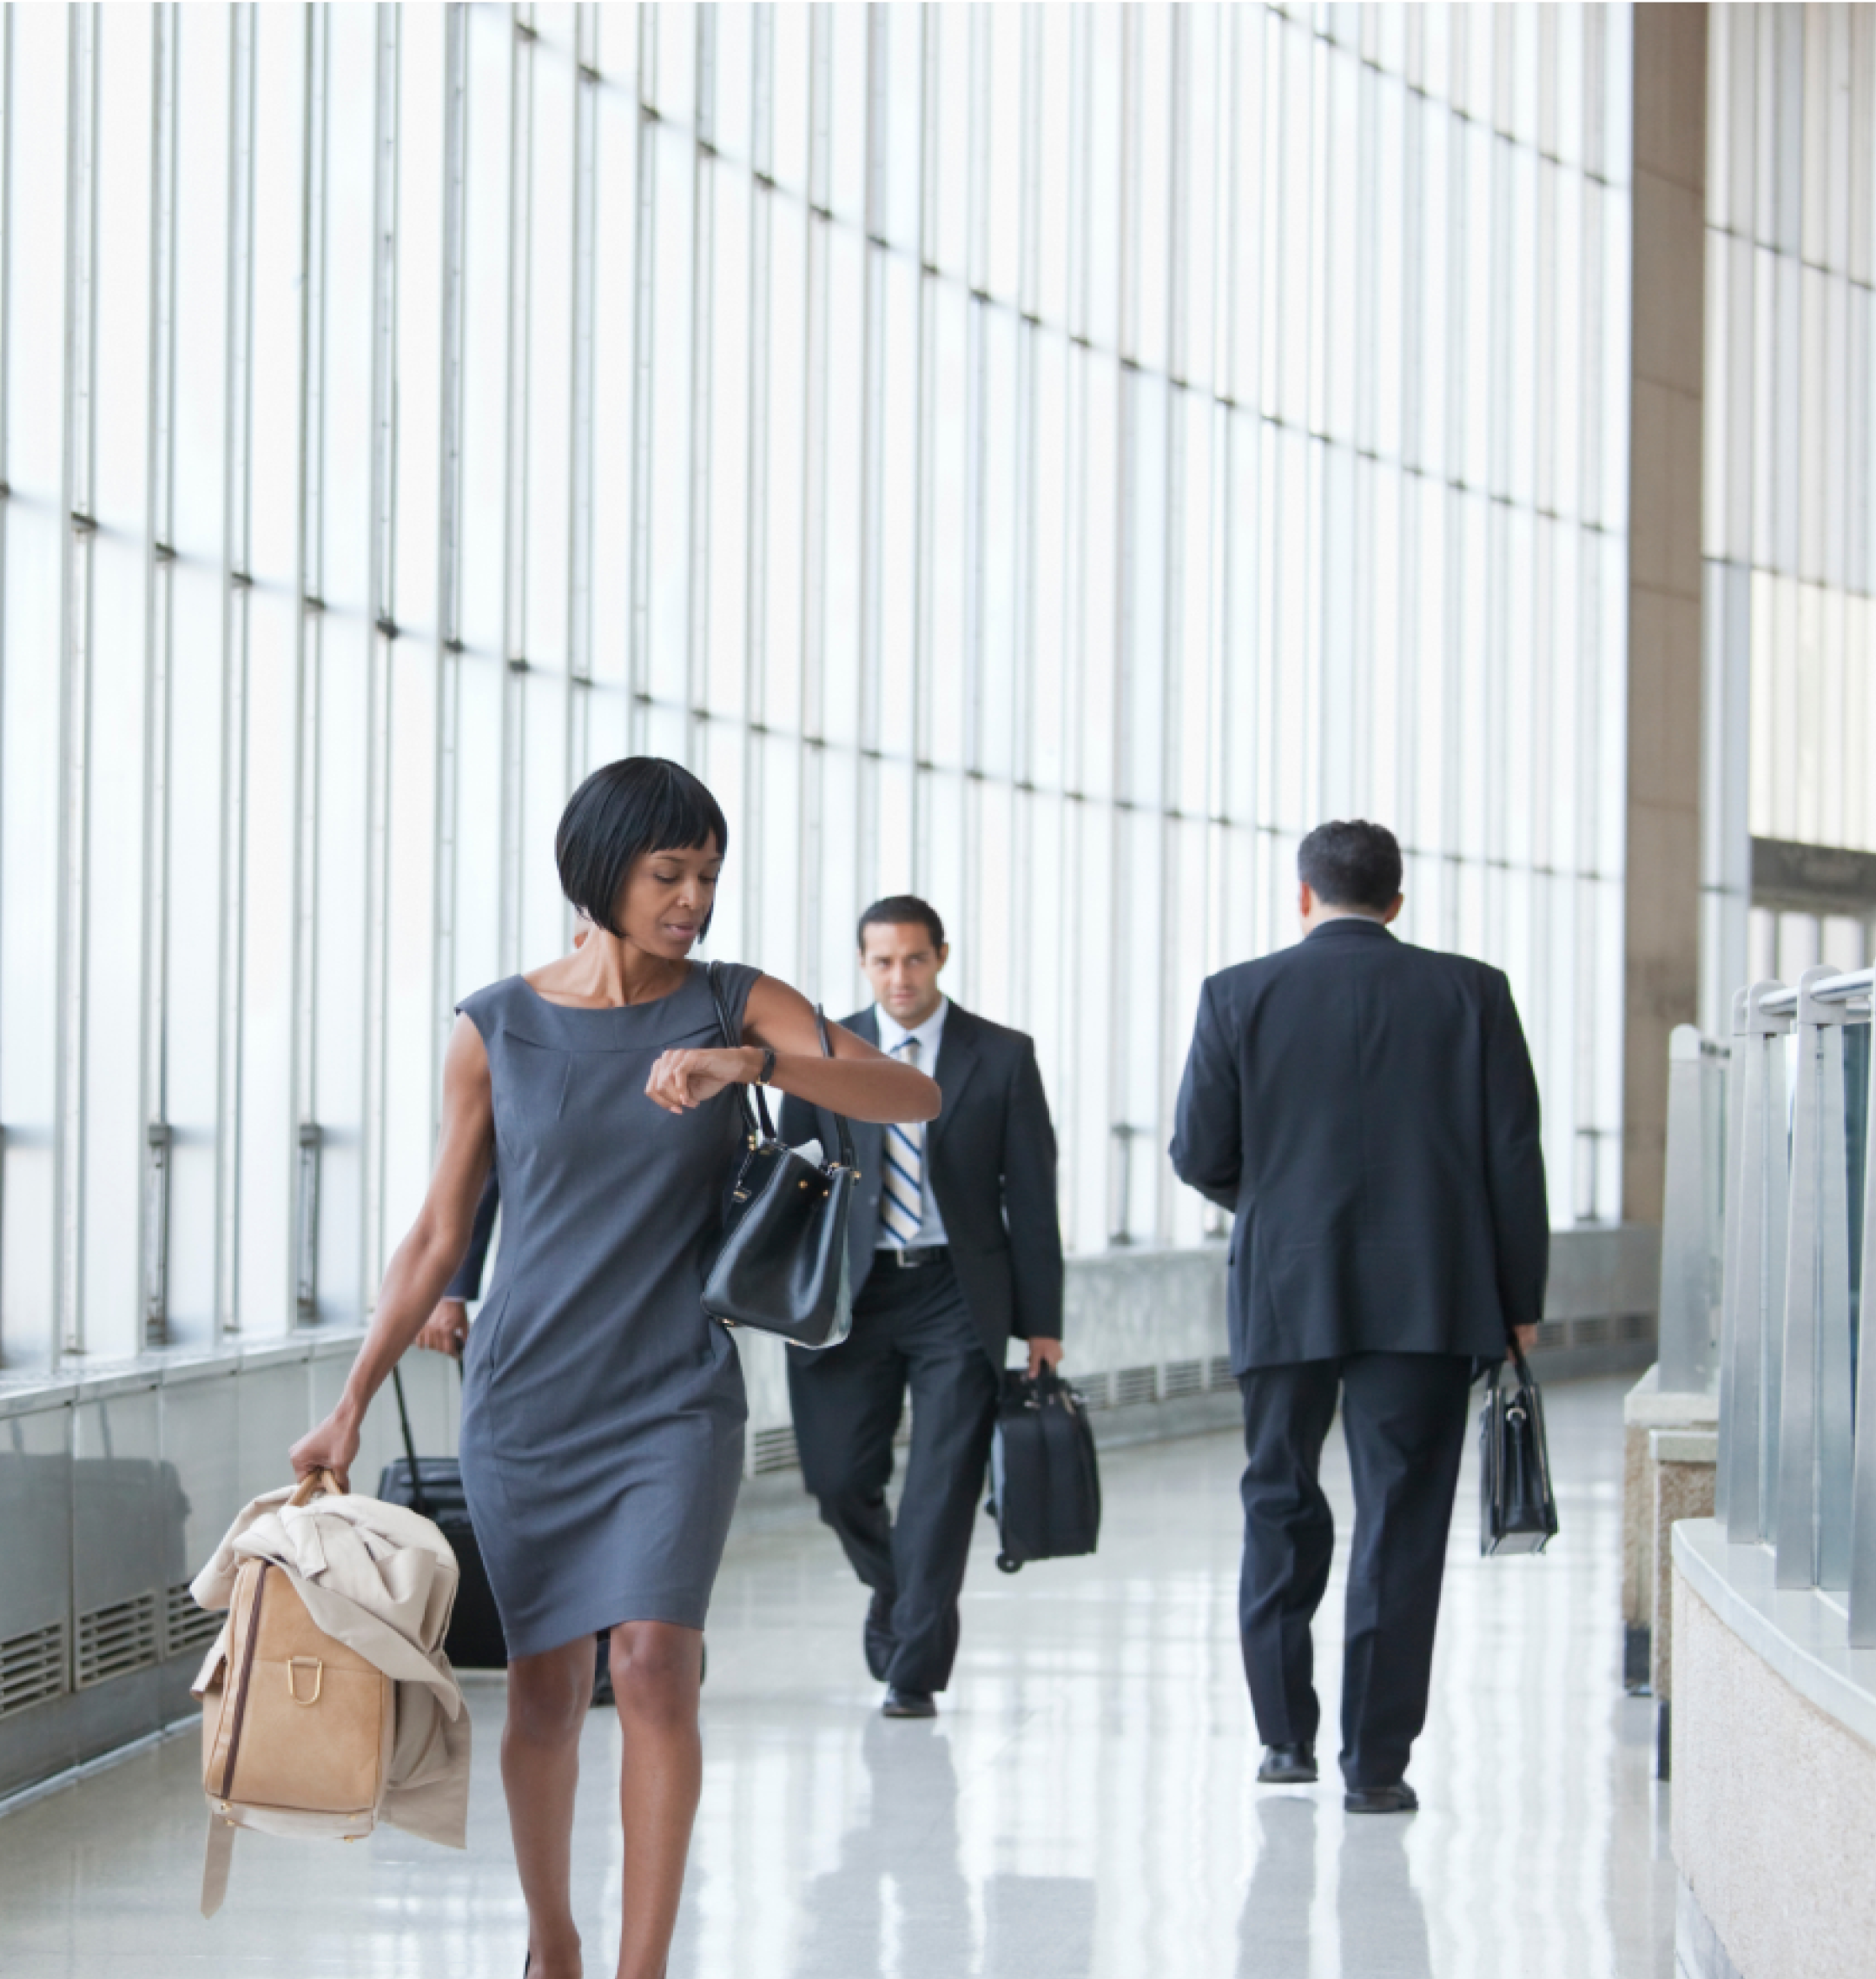 Woman in dress hurriedly walking through a busy office